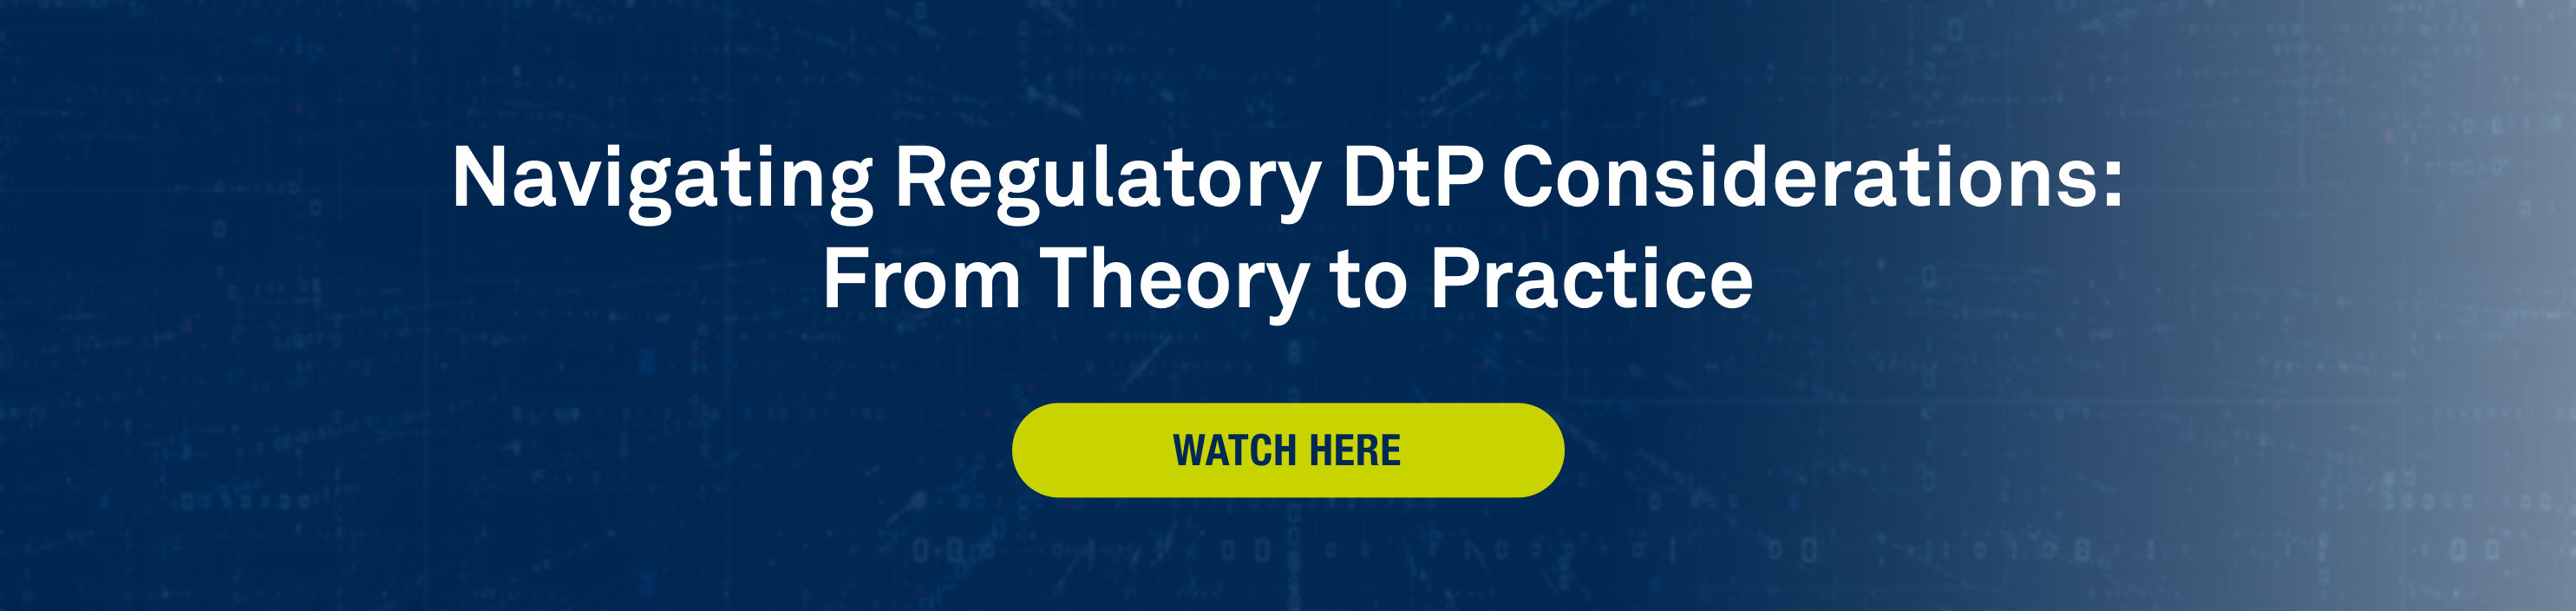 Navigating Regulatory DtP Considerations: from Theory to Practice